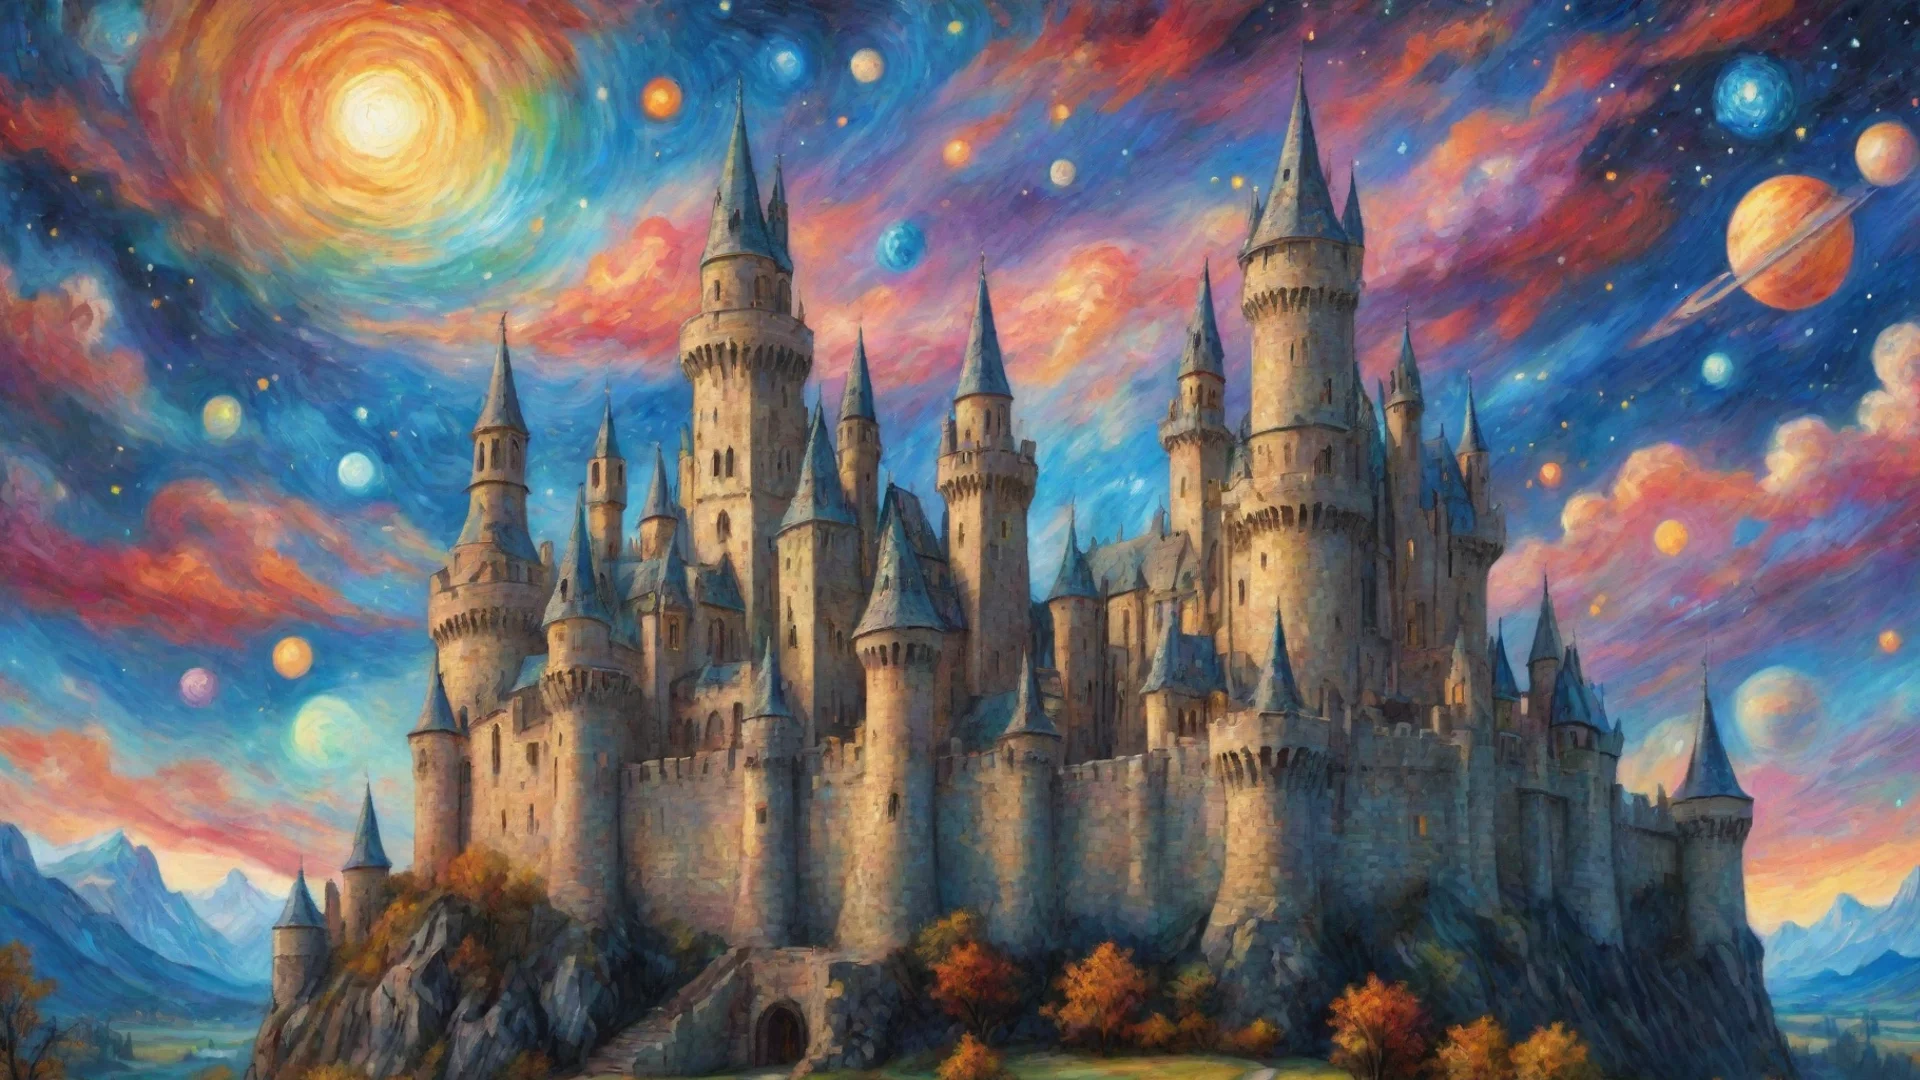 aiepic castle with colorful artistic sky planets van gogh style detailed hd asthetic castle wide